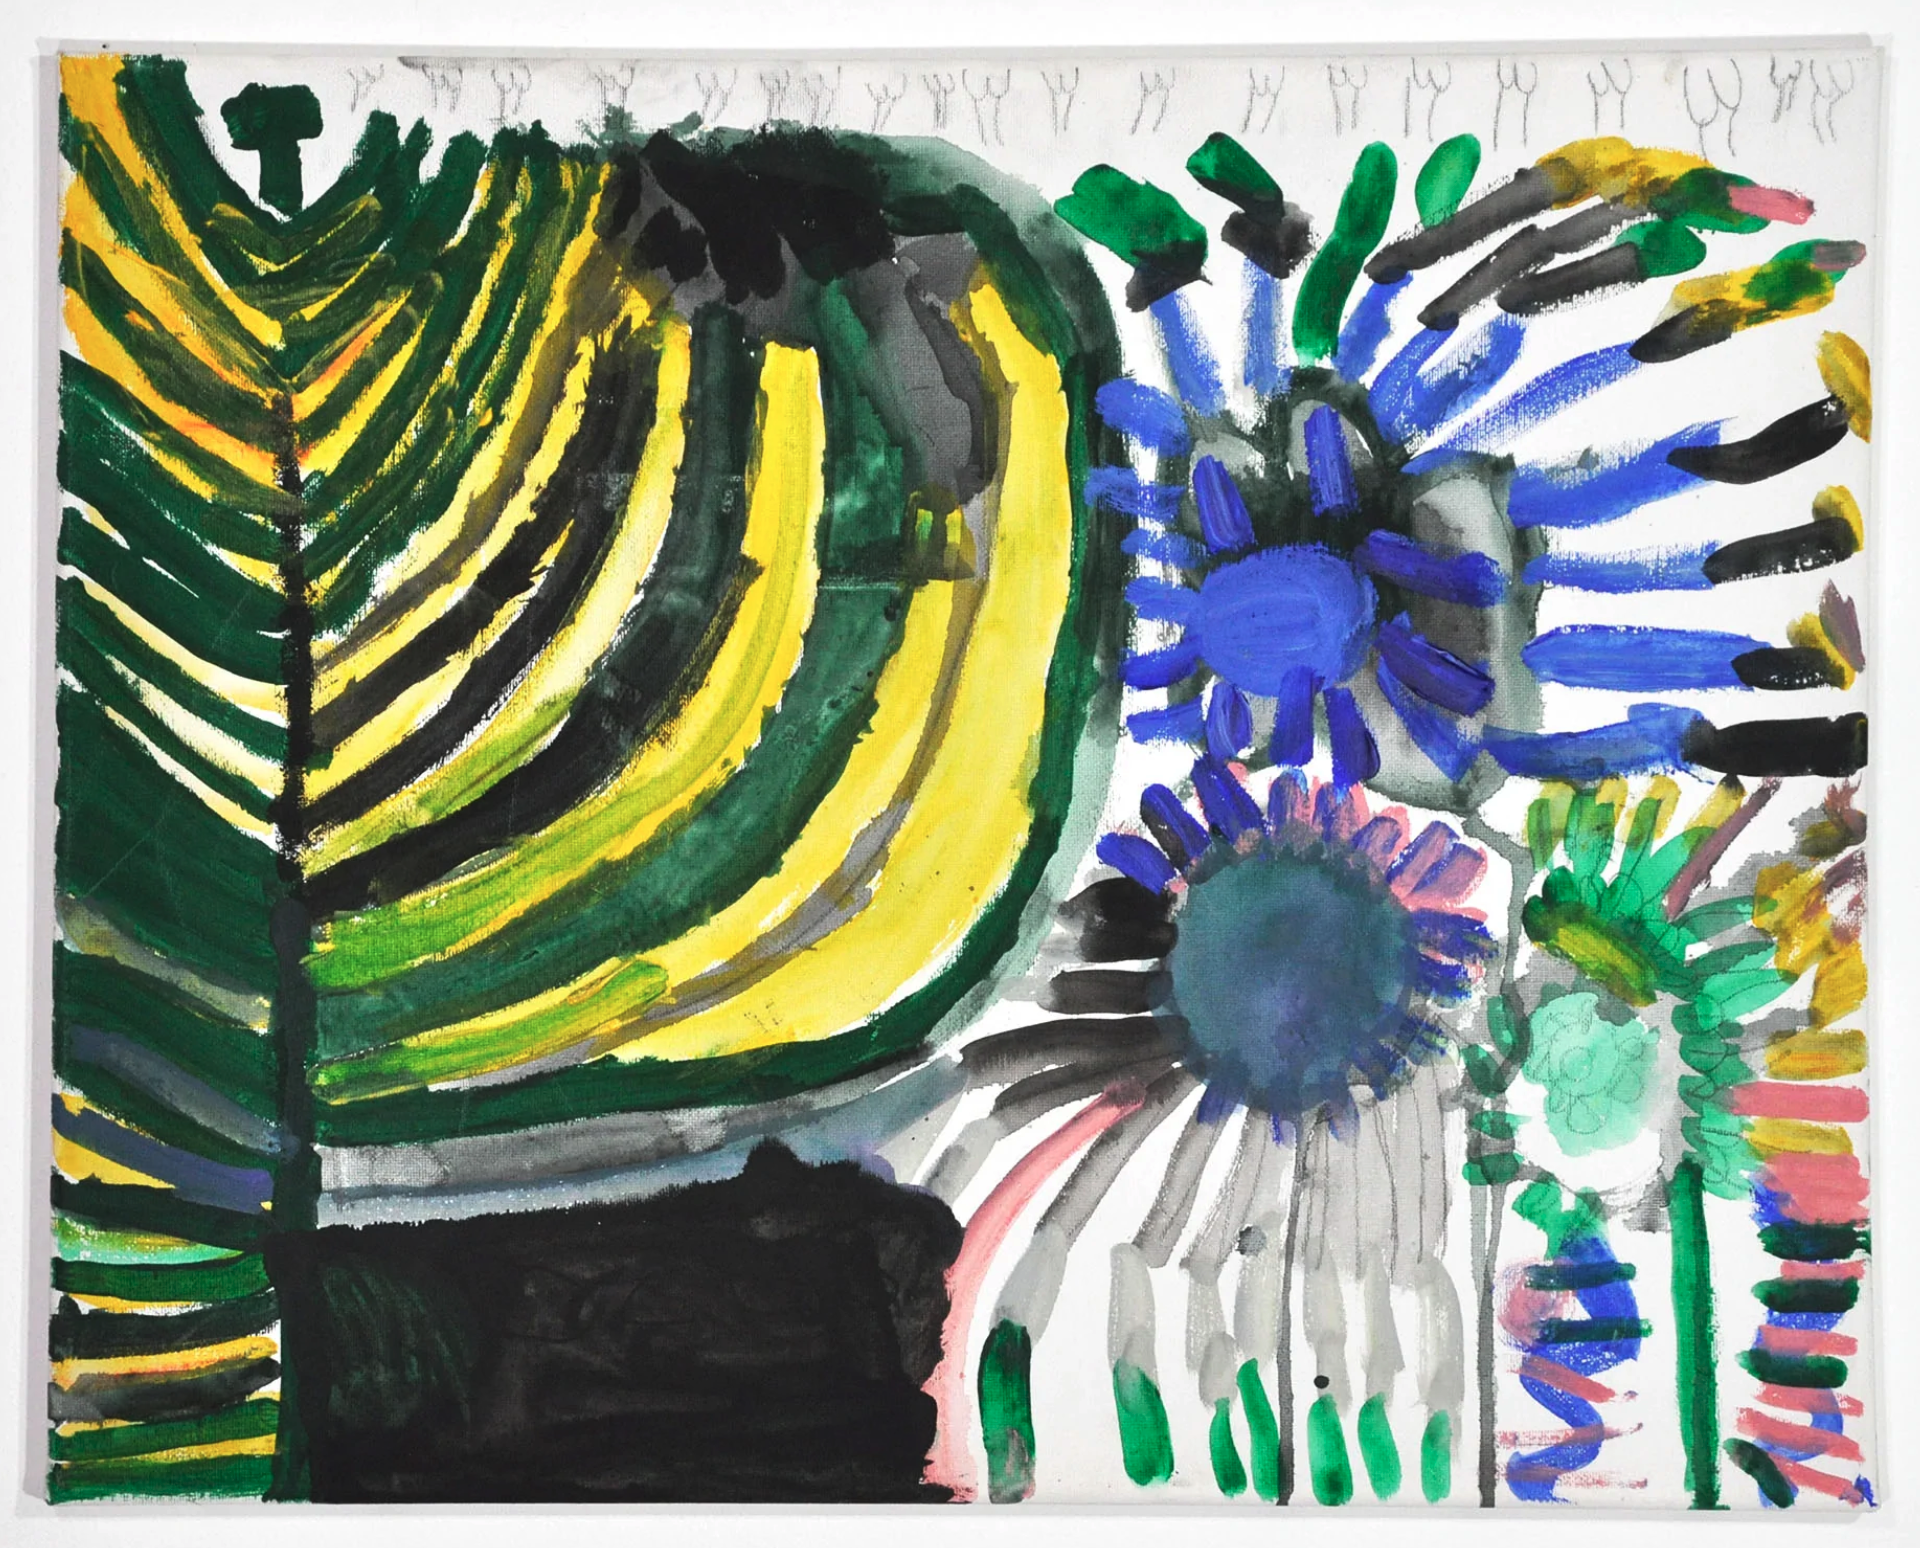 a mixed media work - a large yellow and green fern-like shape dominates the left side of the canvas, with lines radiating out from two circular objects to the left.